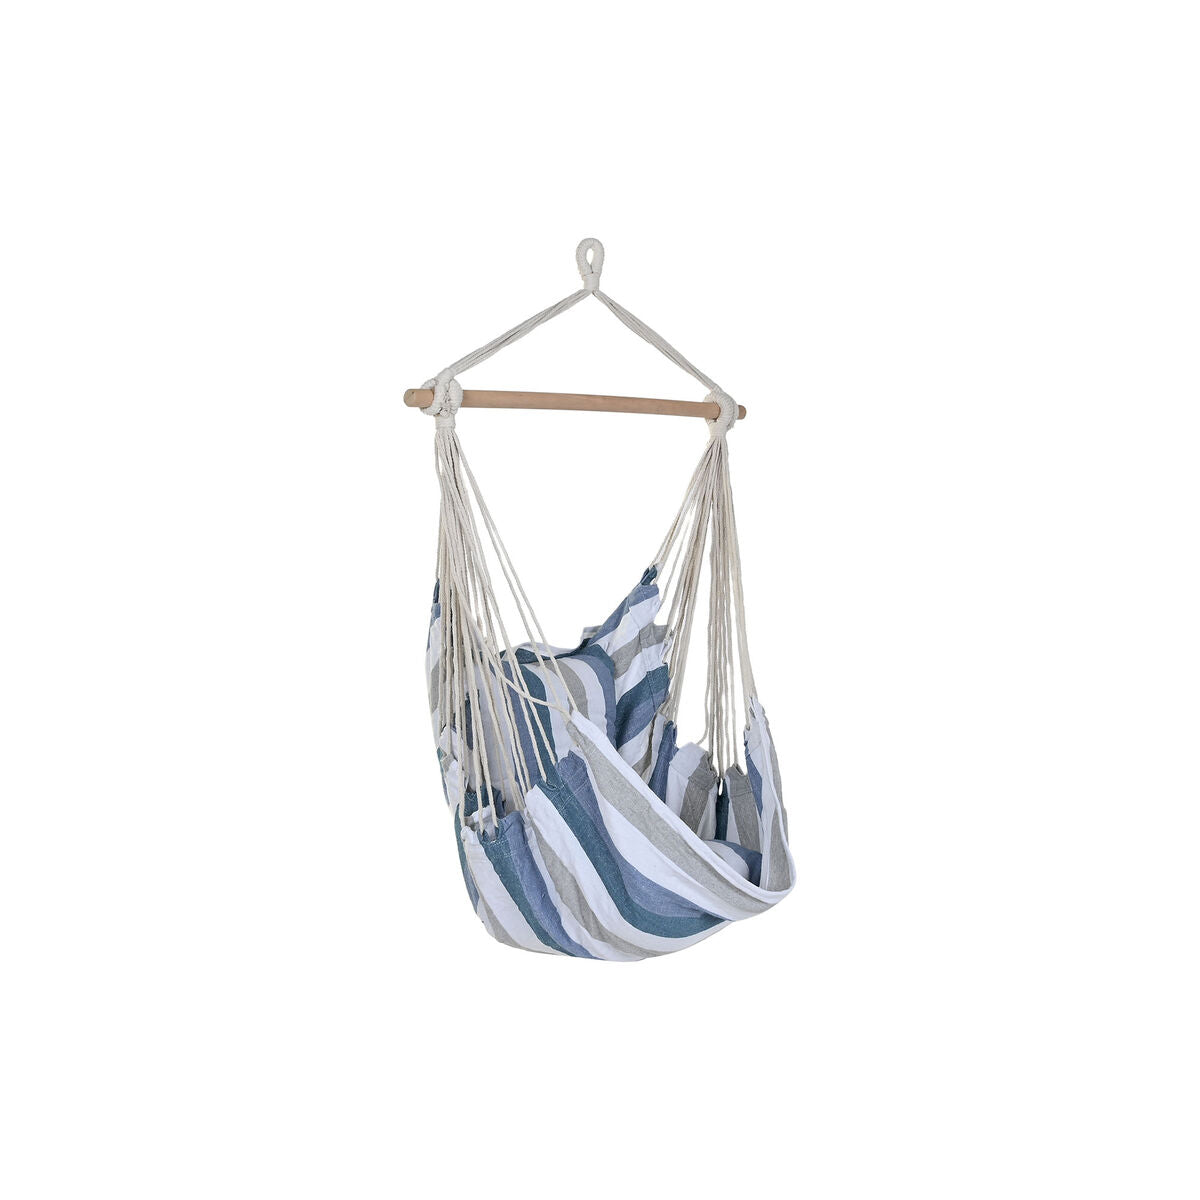 Outdoor / Indoor Blue White Hanging Chair with Stripes (100 x 60 x 135 cm)